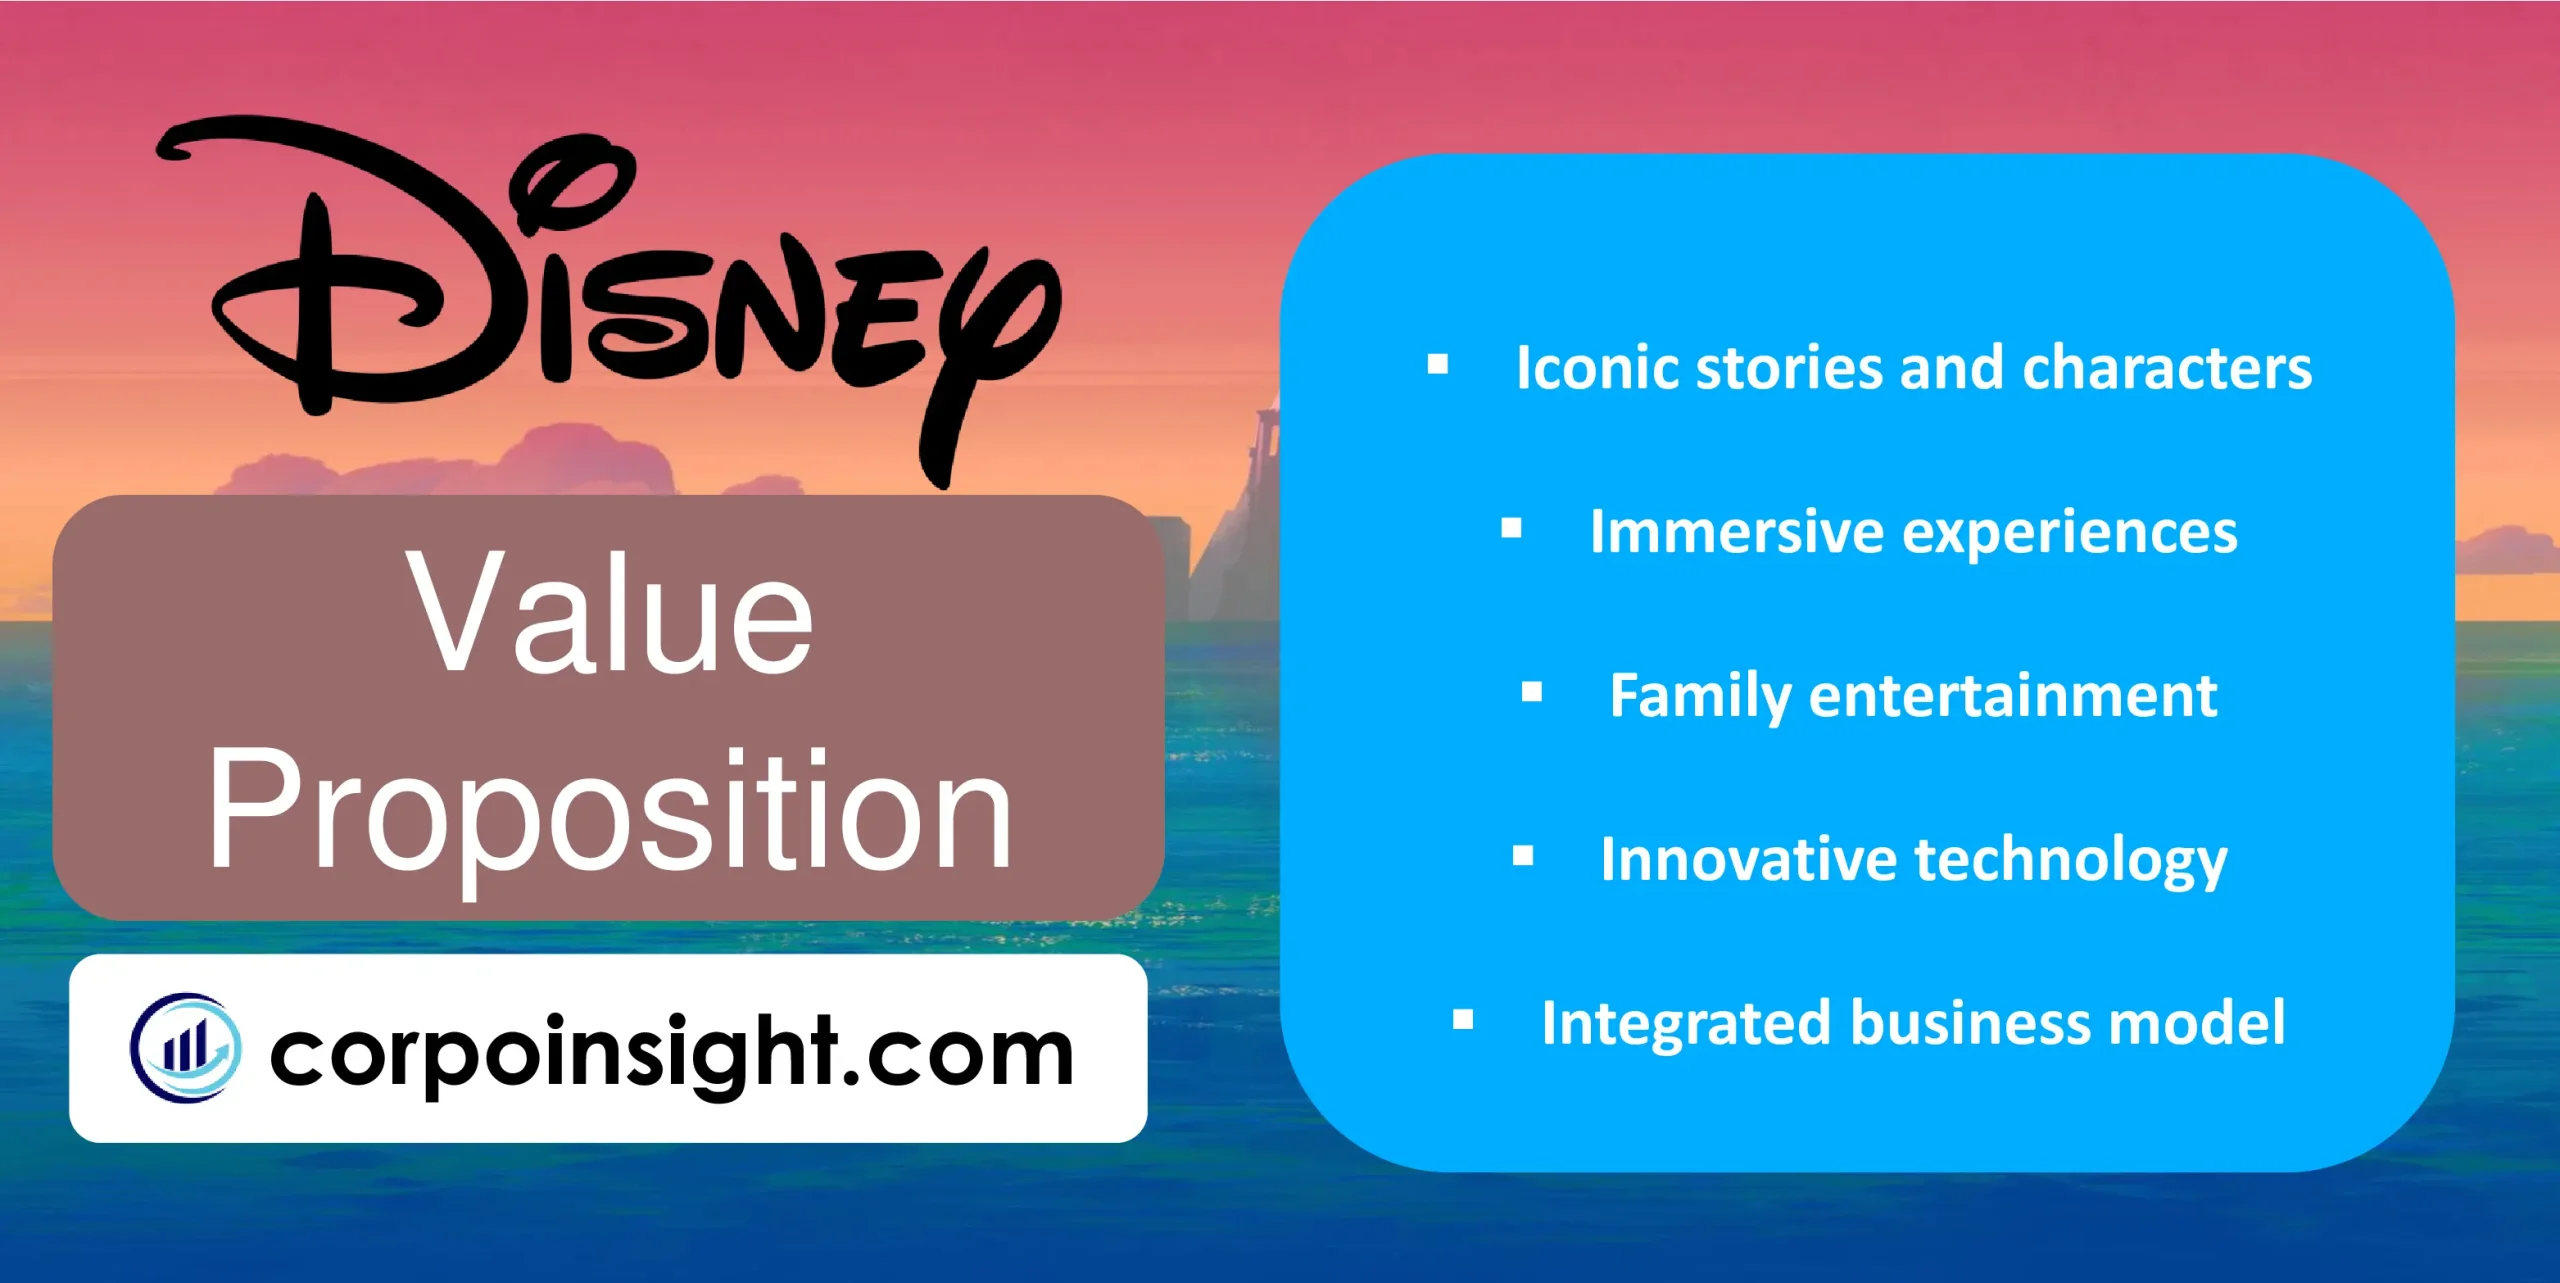 Value Proposition of Disney